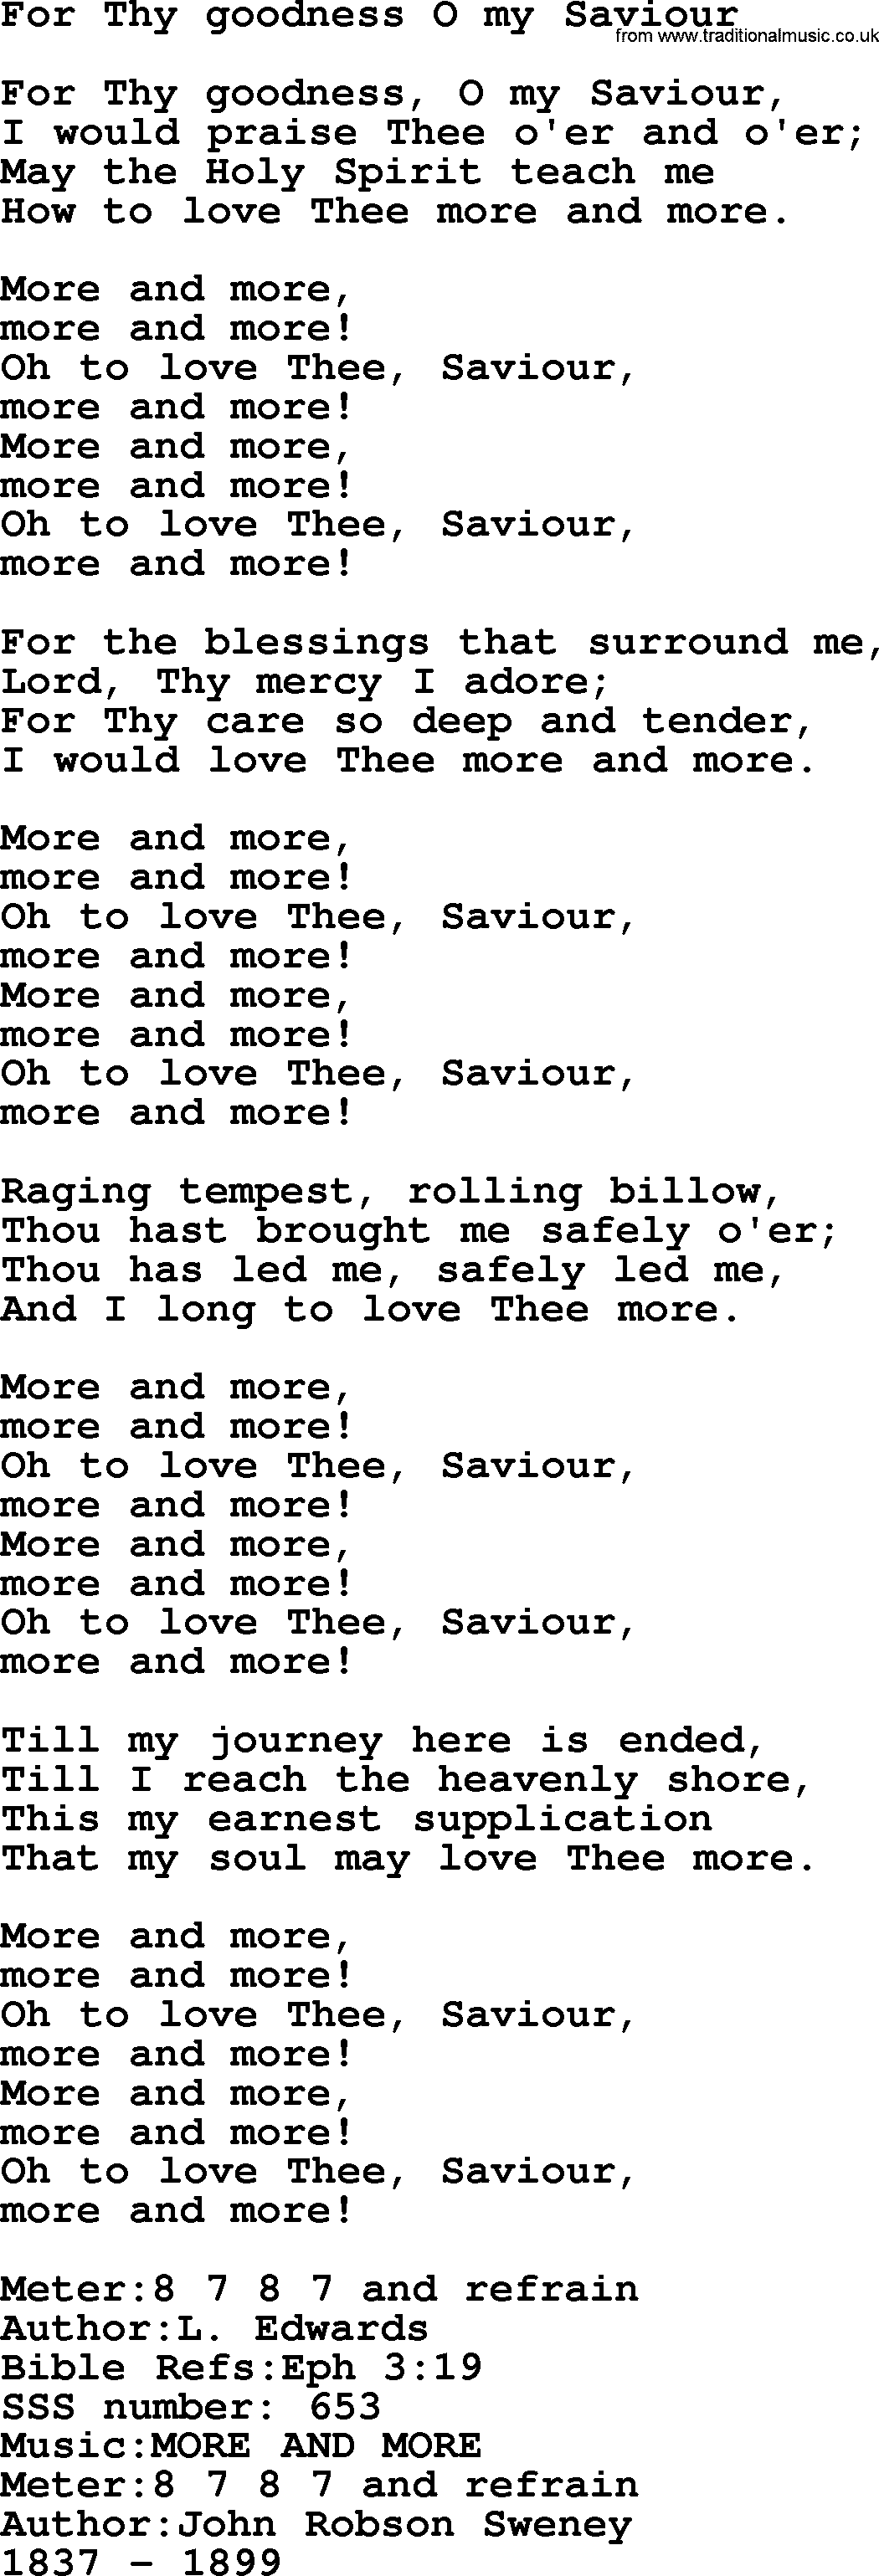 Sacred Songs and Solos complete, 1200 Hymns, title: For Thy Goodness O My Saviour, lyrics and PDF